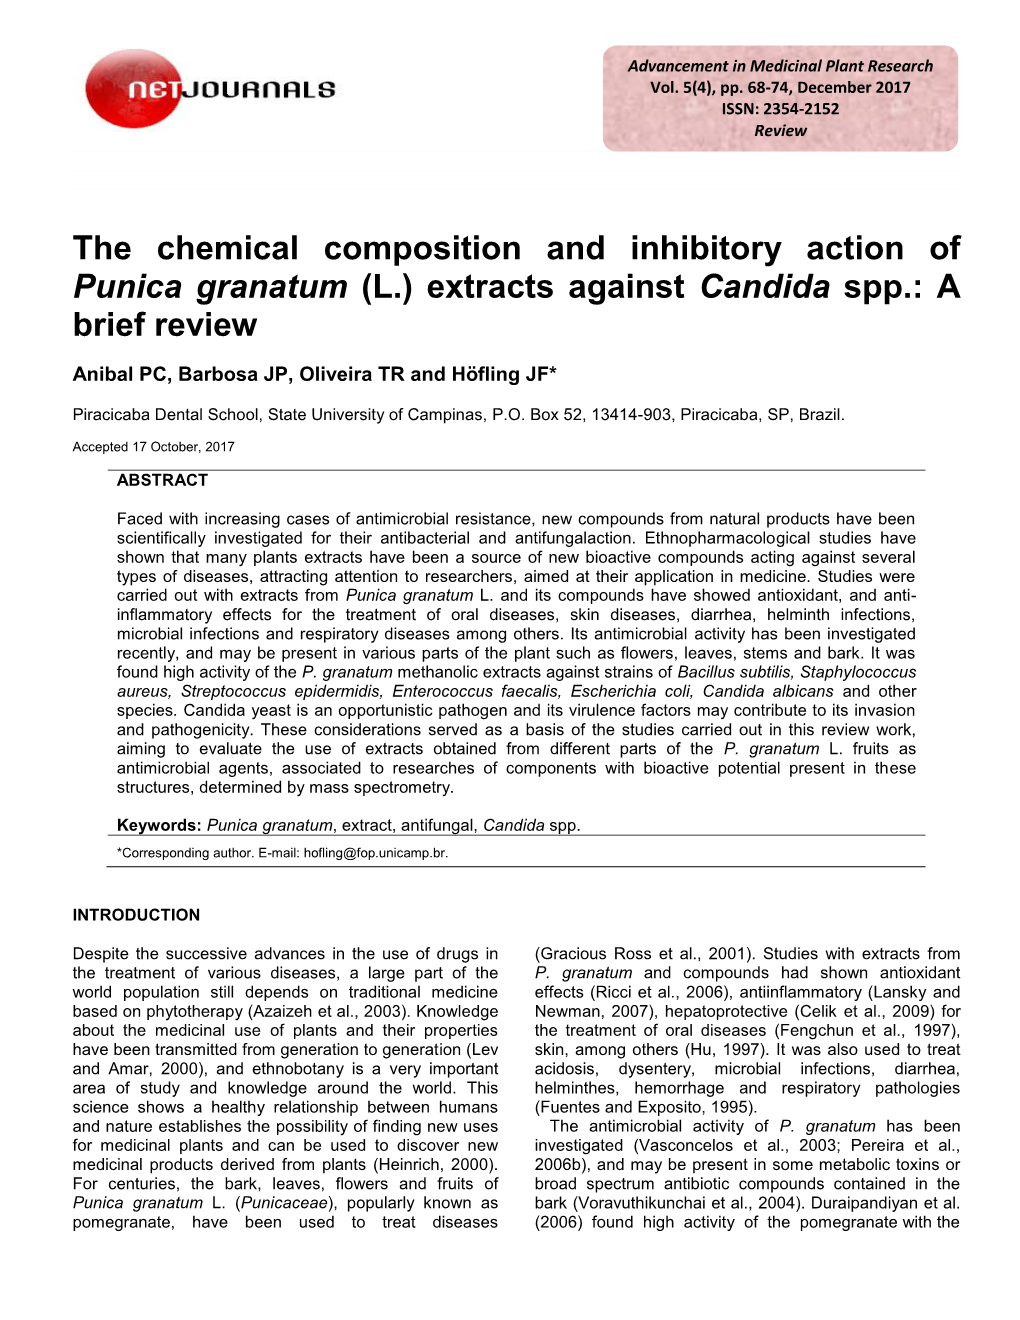 The Chemical Composition and Inhibitory Action of Punica Granatum (L.) Extracts Against Candida Spp.: a Brief Review